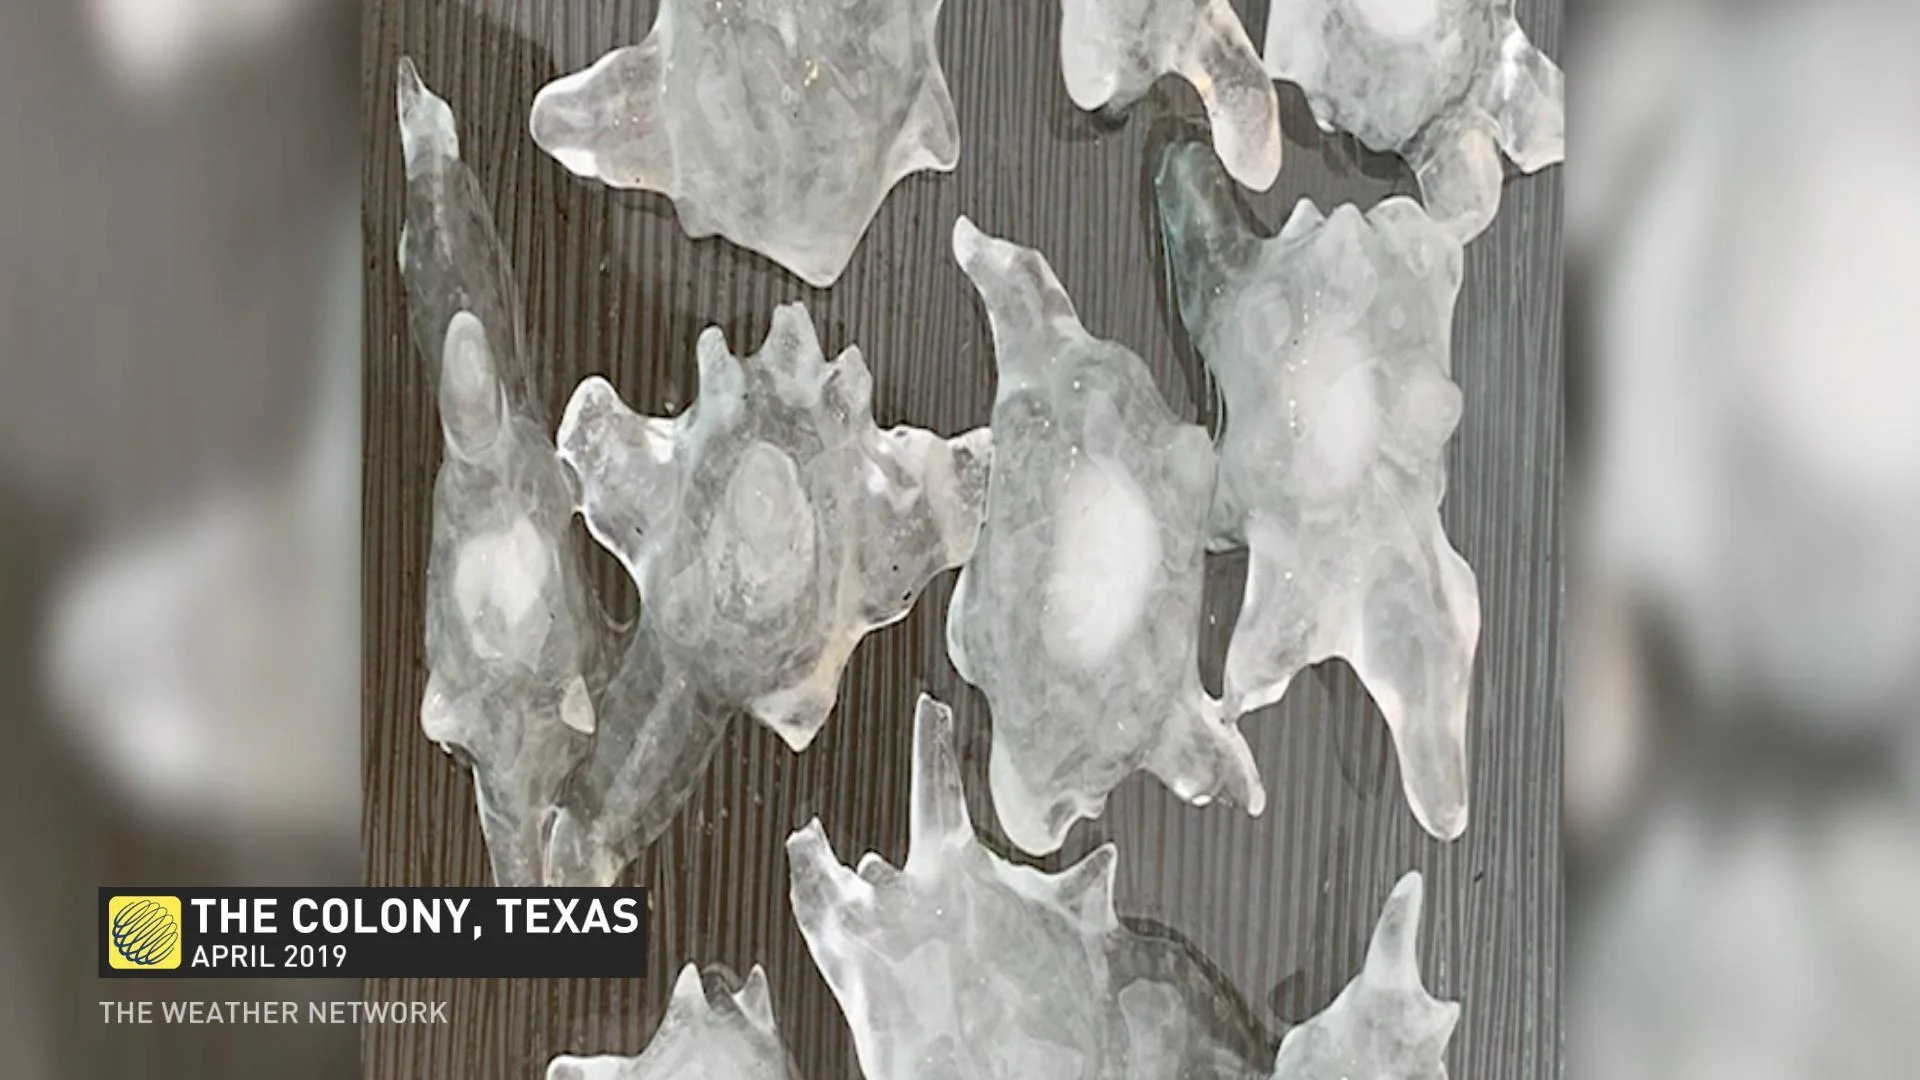 See why these spiky hailstones are battering the U.S. South